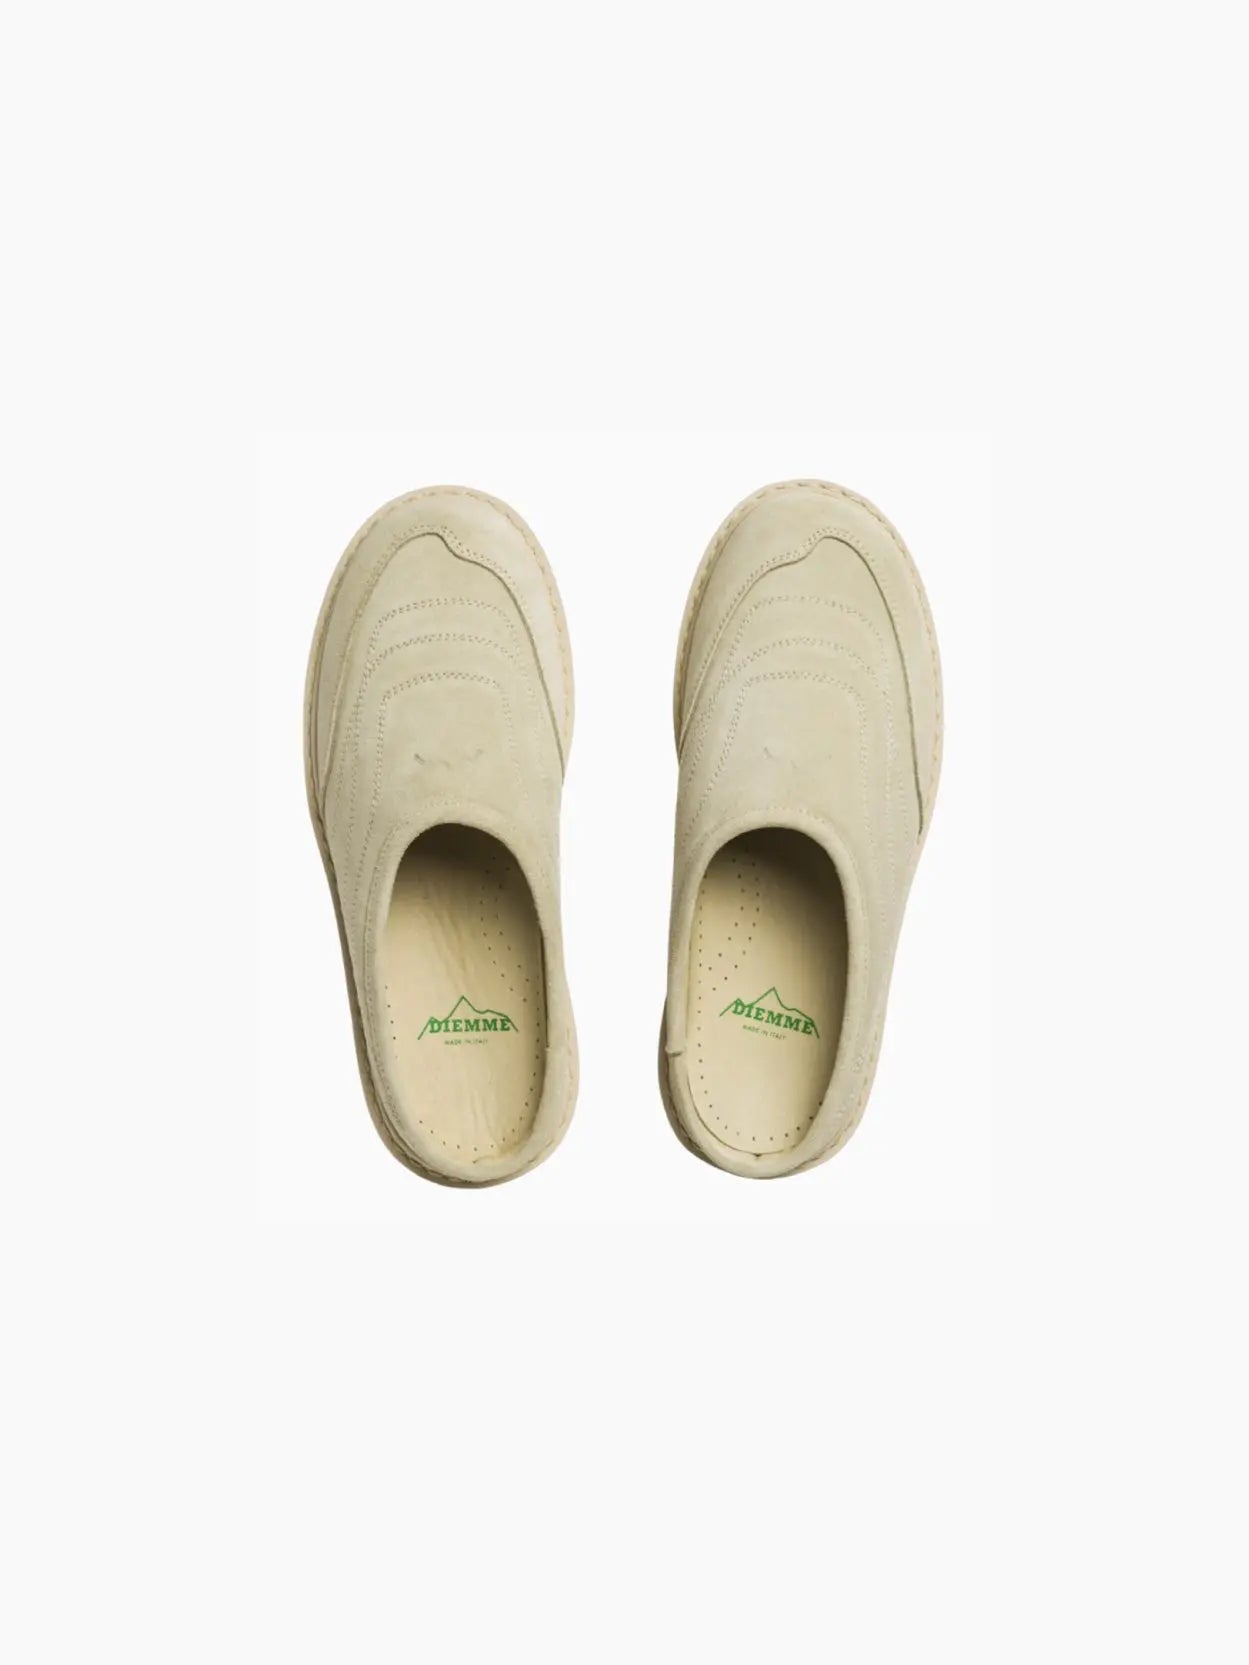 A single beige slip-on shoe, the "Maggiore Ecru Suede" by Diemme, available at bassalstore in Barcelona, featuring a rugged, lugged sole and minimalistic design. The upper part showcases subtle stitched detailing for texture. The shoe has a closed toe and an open back, resembling a mule style. The outsole is slightly thicker, offering added traction.